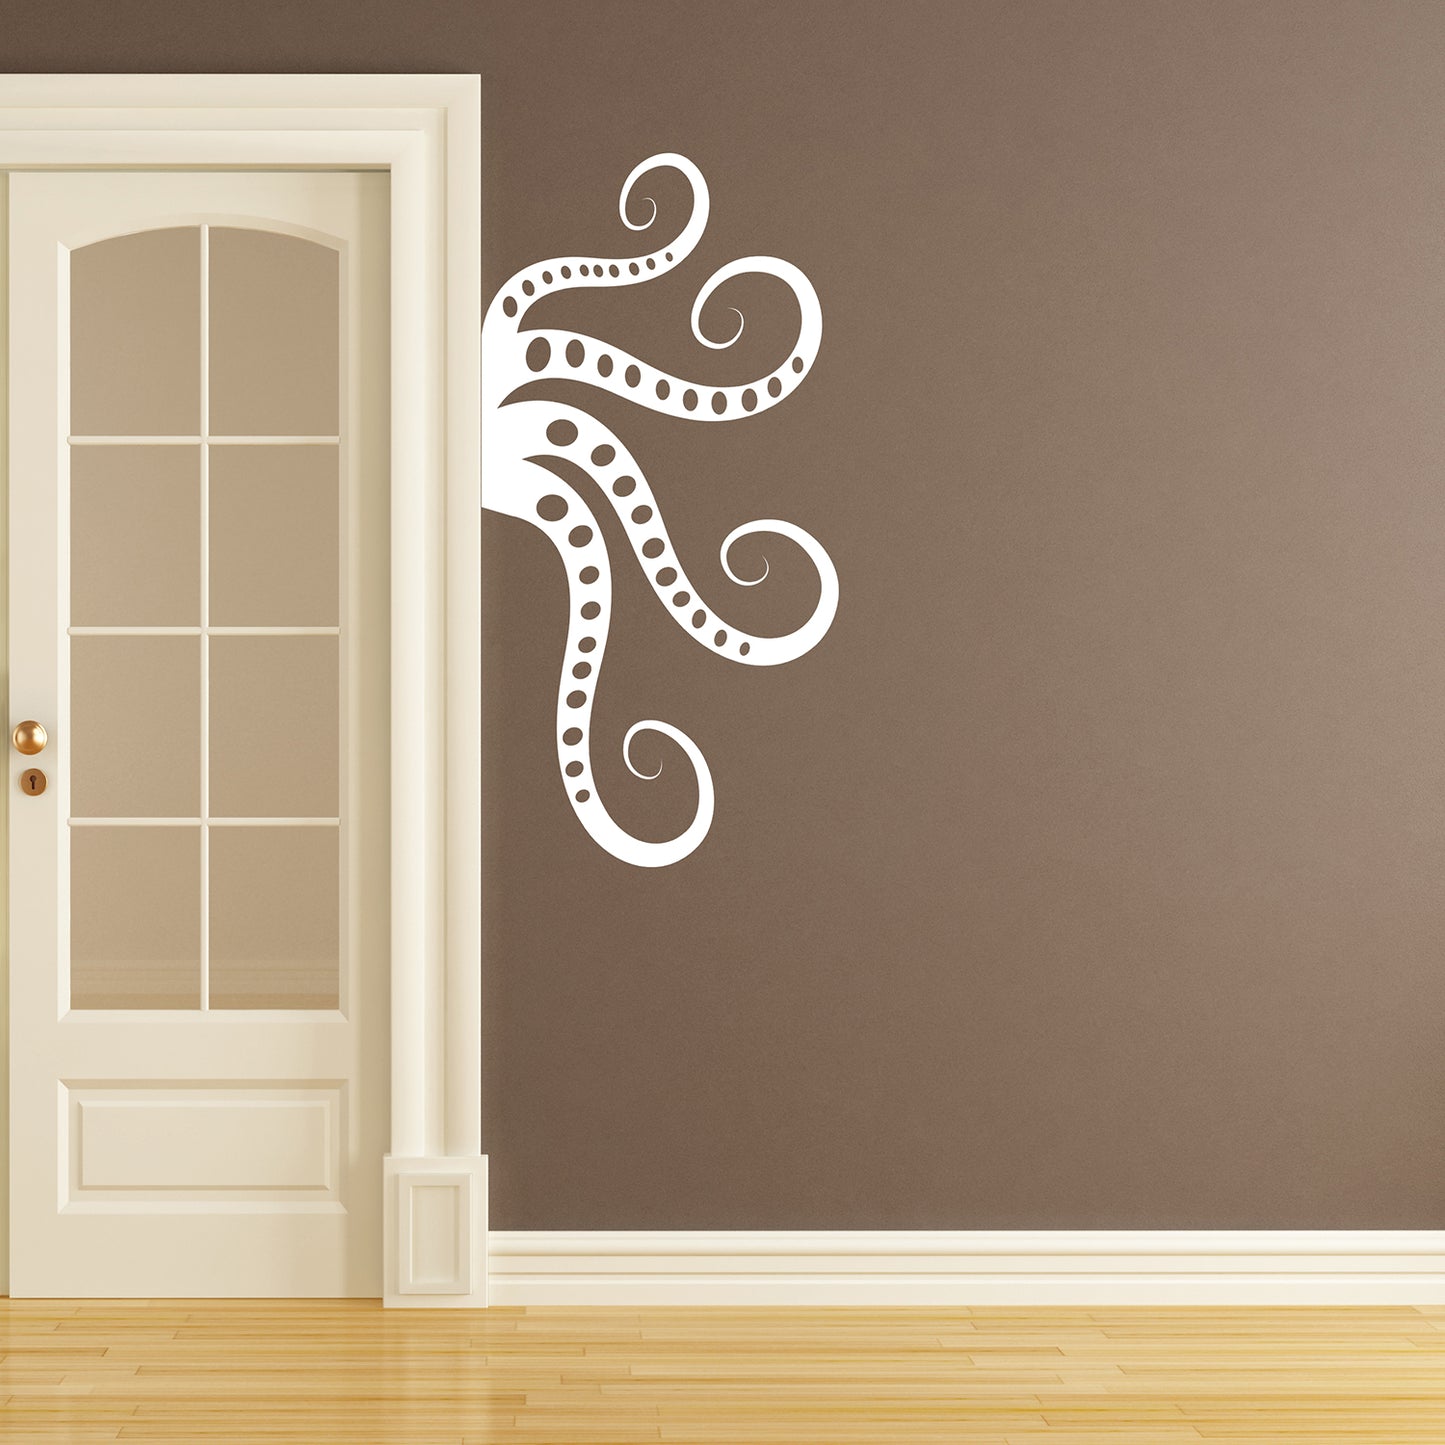 Octopus tentacles | Wall decal